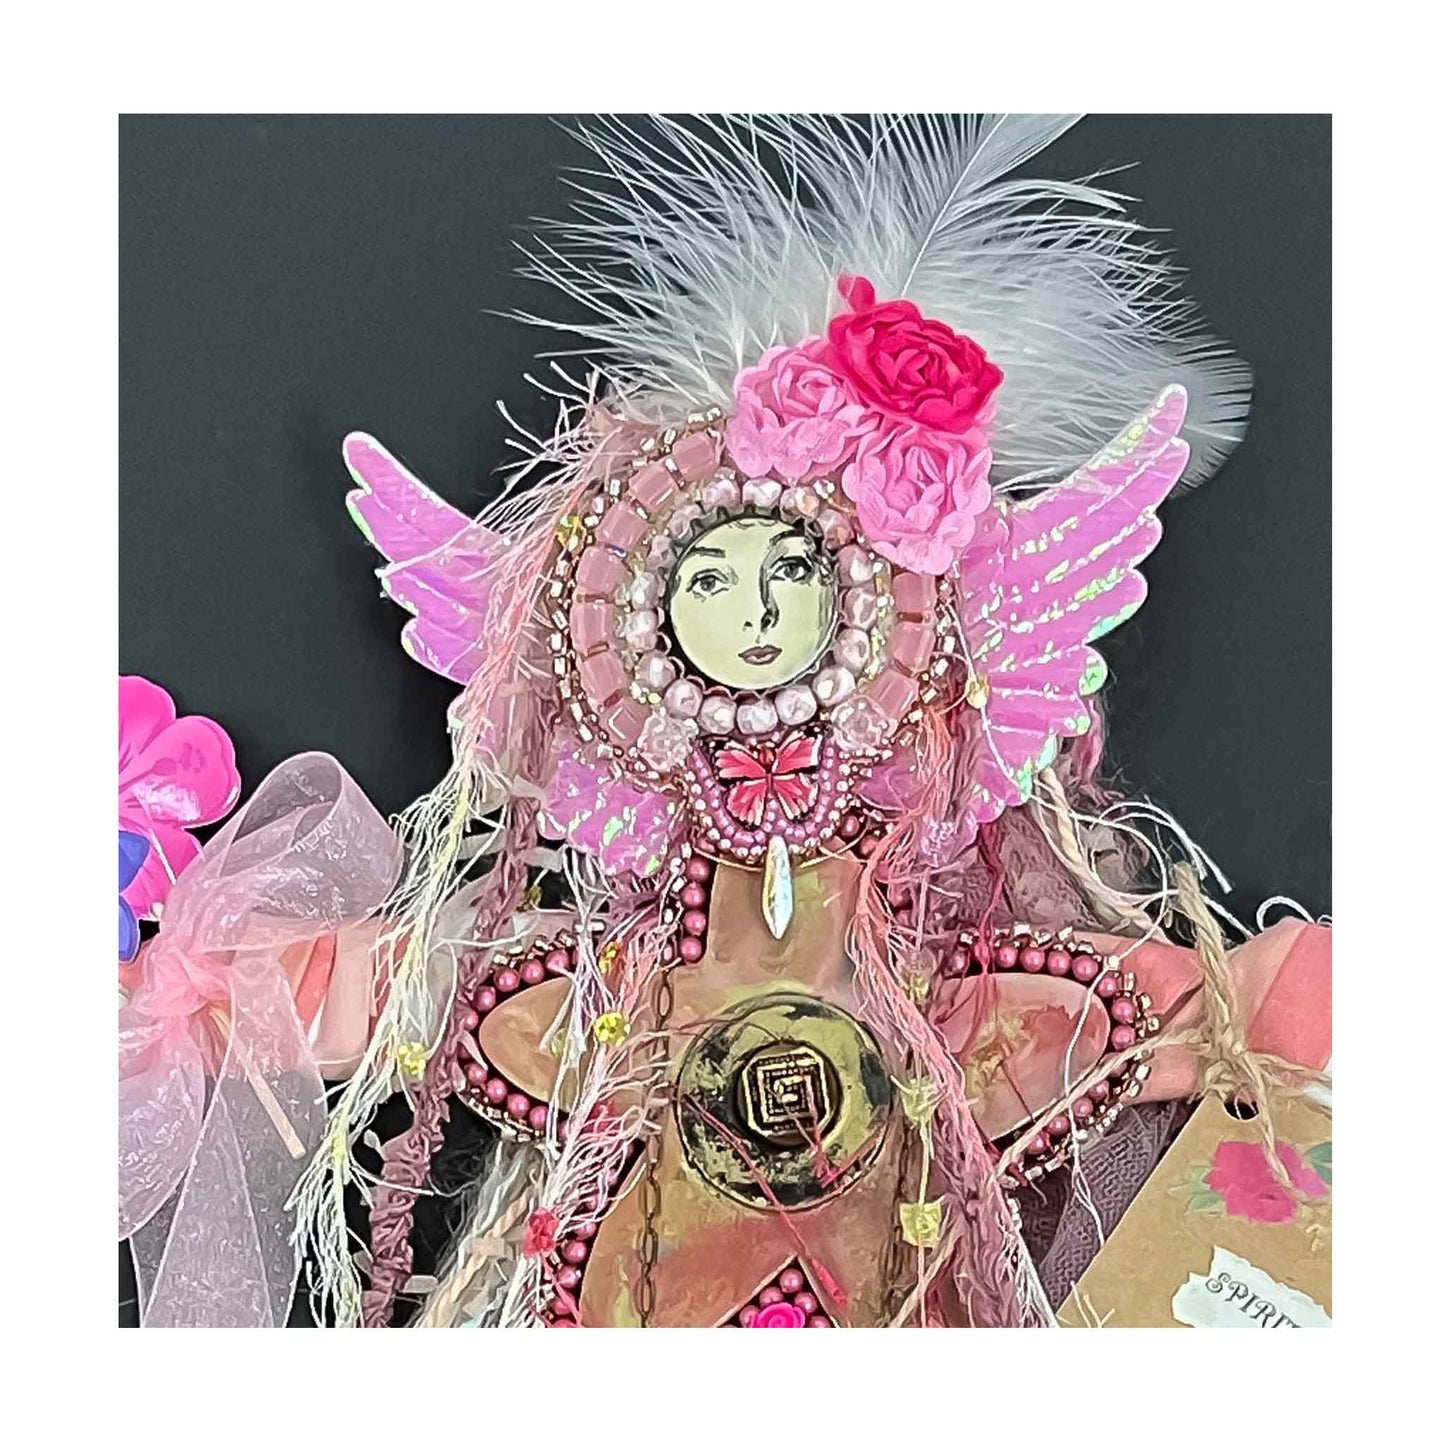 Doll, Spirit of Hope,  pink chiffon,  bead embroidery, encaustic, painted wood, ceramic shoes, flowers, a butterfly. a necklace, wings, wire, fabric, yarn, feathers, 16 X 9